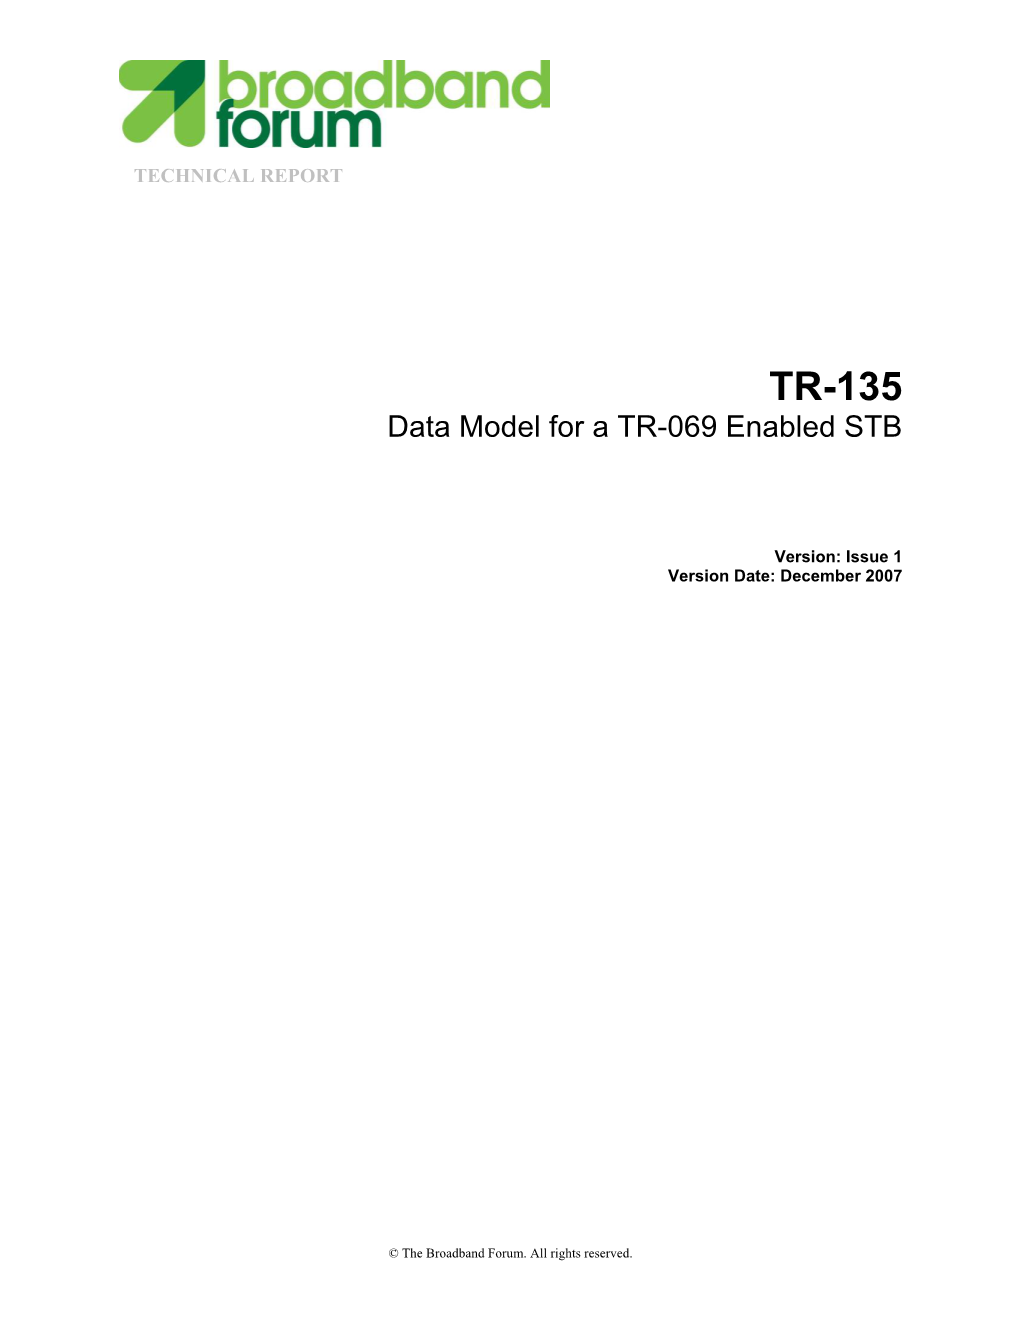 TR-135 Data Model for a TR-069 Enabled STB